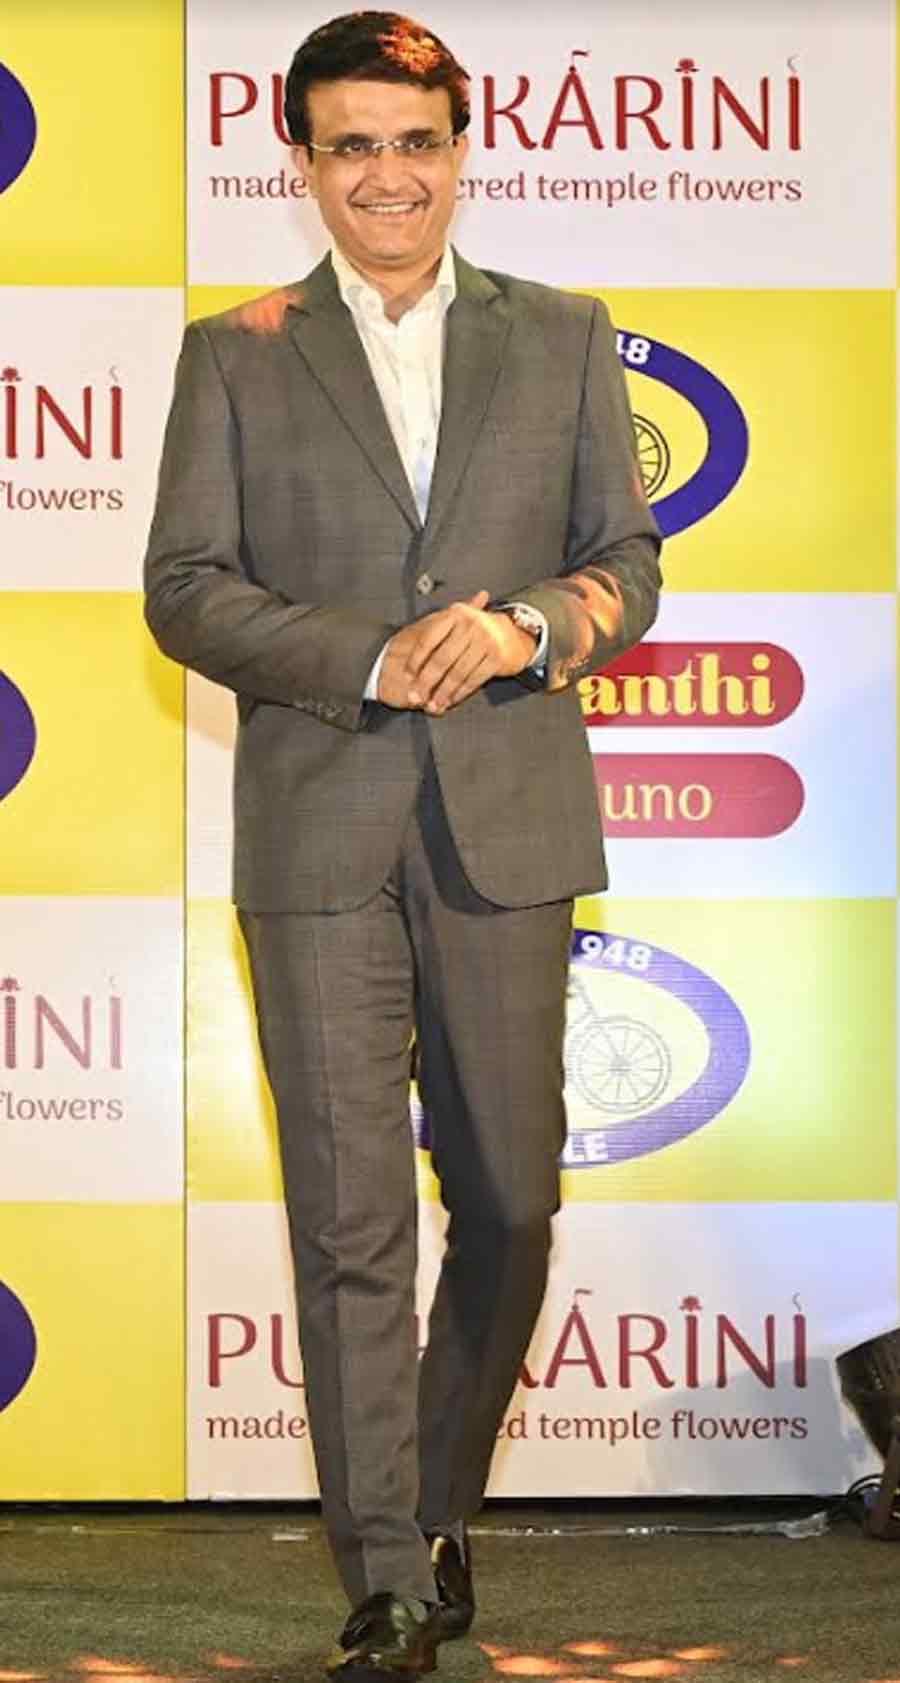 BCCI president Sourav Ganguly at a promotional event on Tuesday